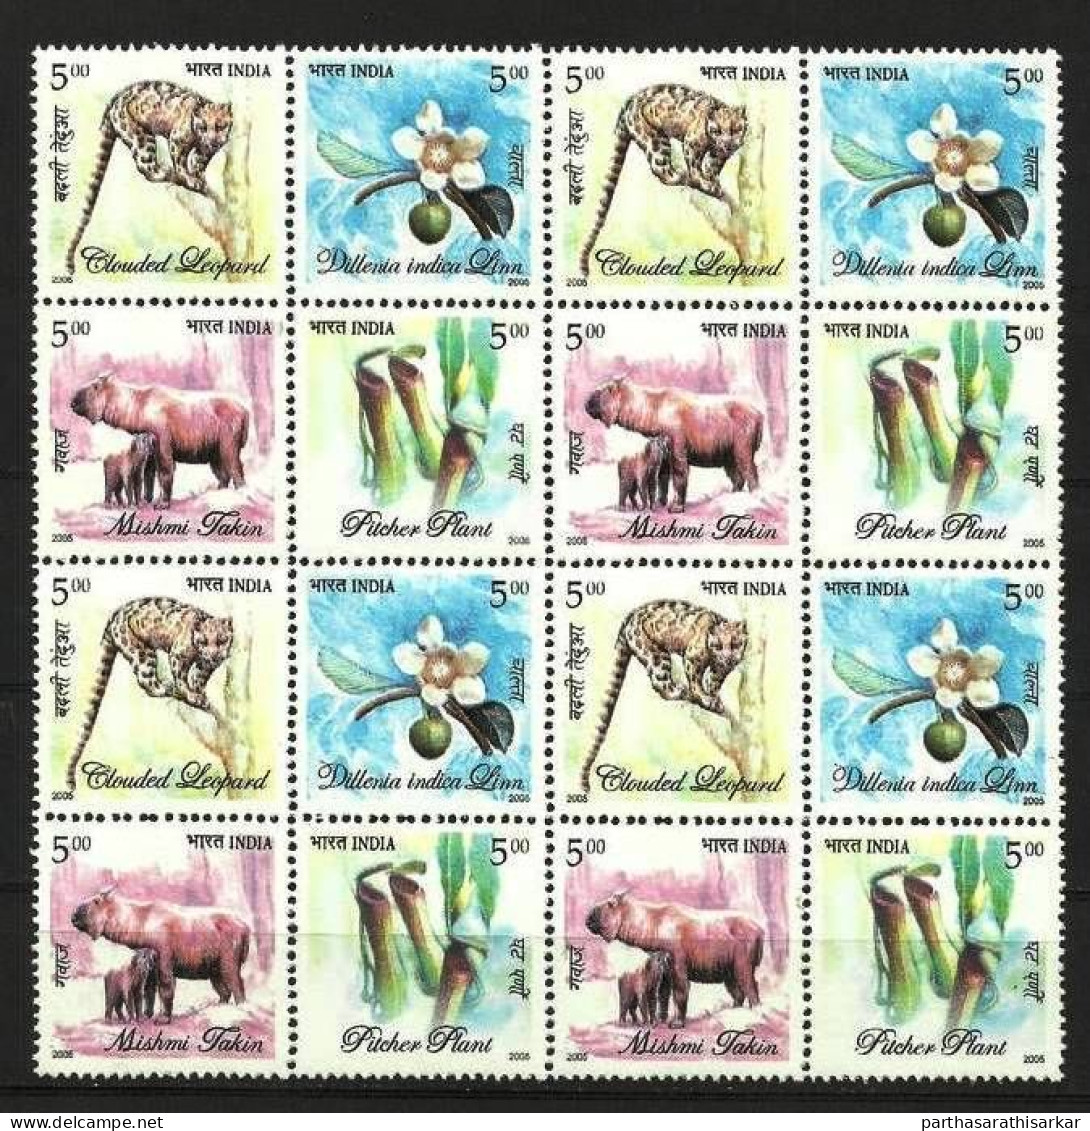 INDIA 2005 FLORA AND FAUNA OF NORTH EAST INDIA COMPLETE SE-TANENT BLOCK OF 4 MNH RARE - Unused Stamps